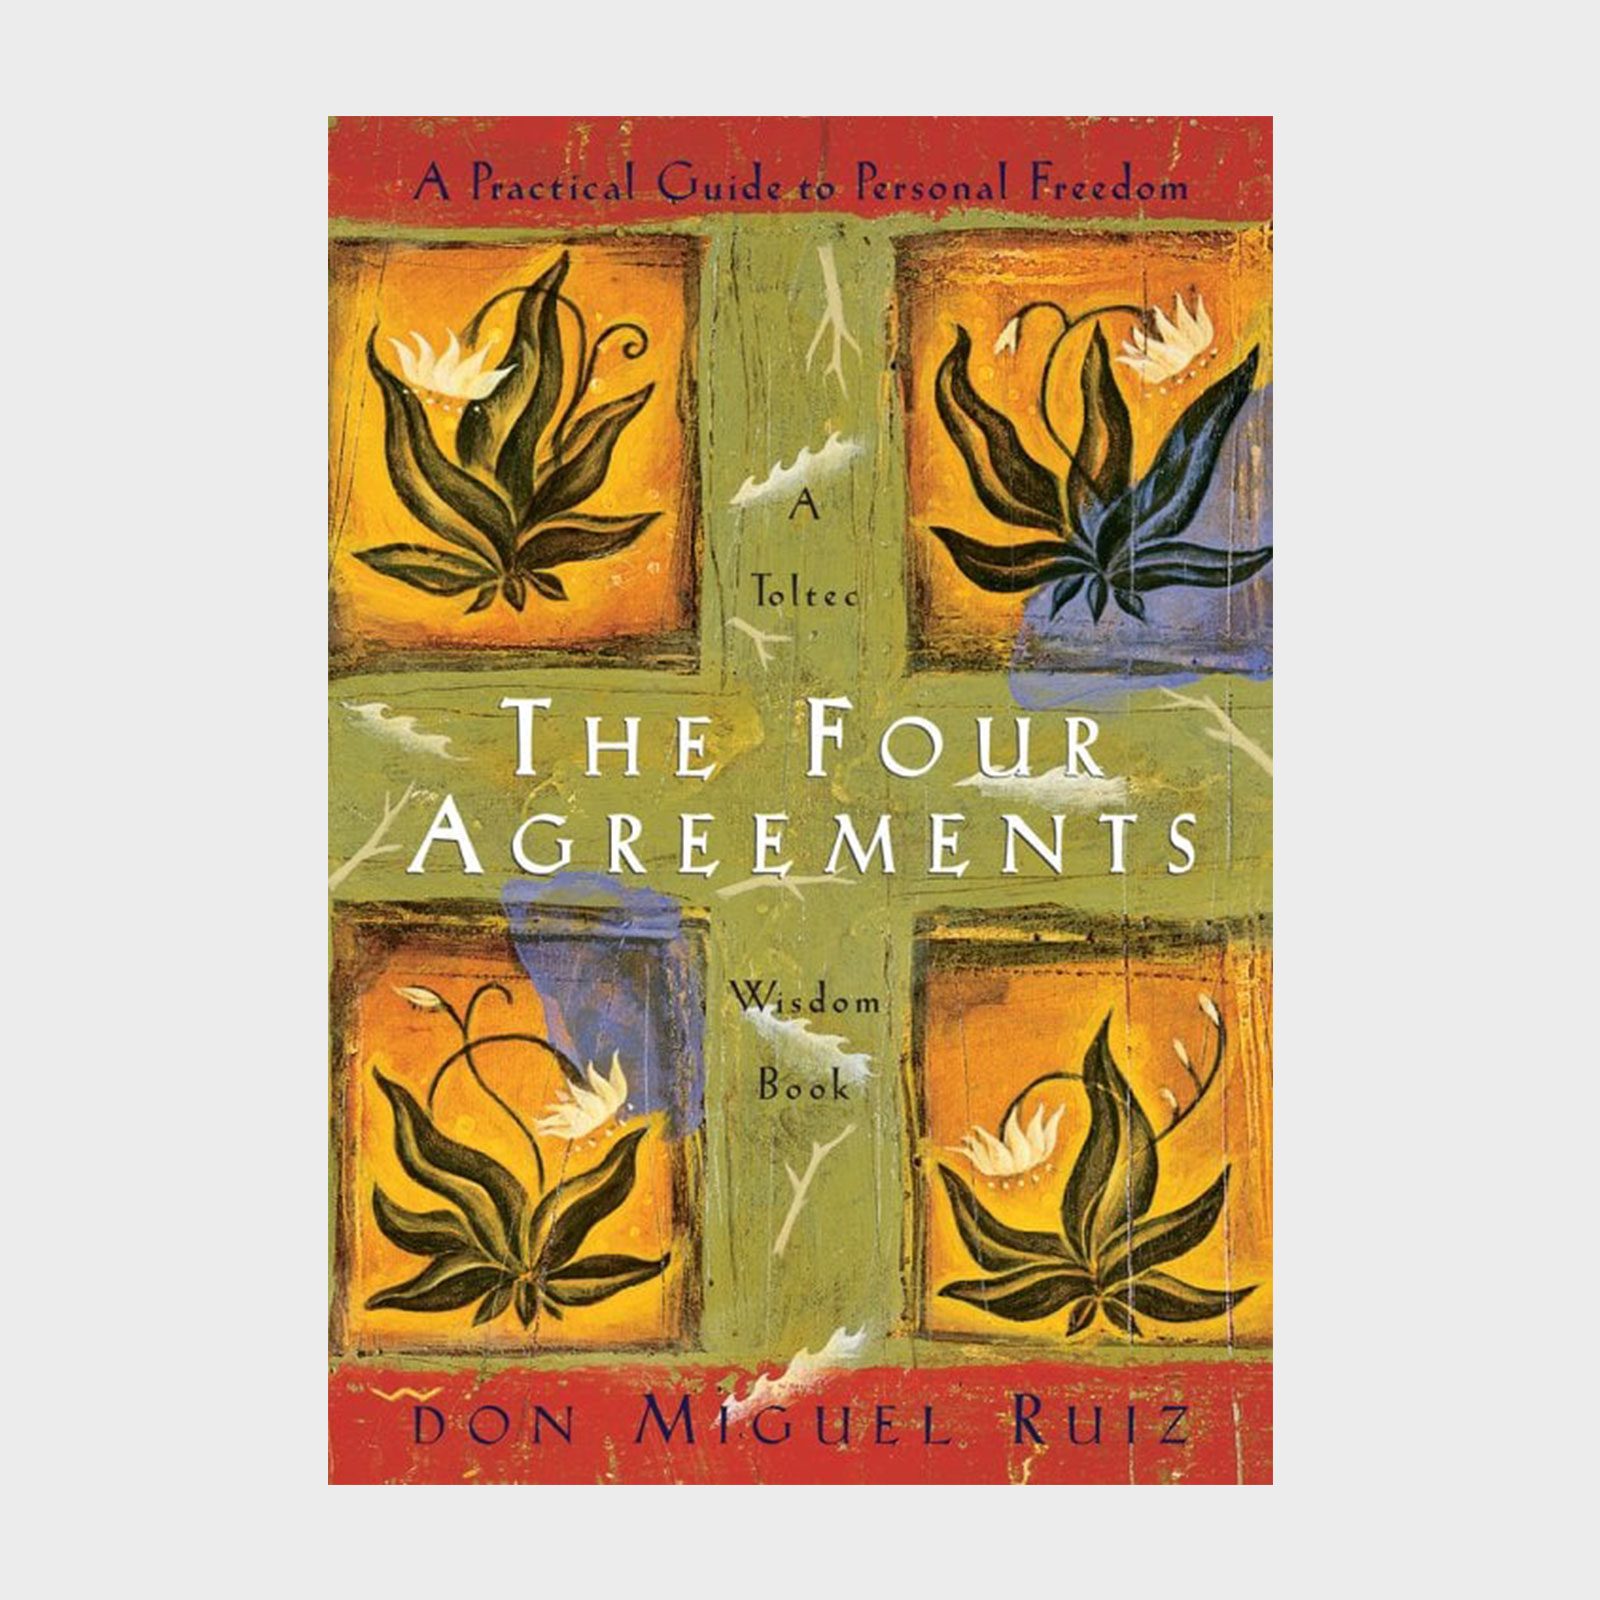 <p>In his bestselling 1997 book, Don Miguel Ruiz introduces readers to wisdom from the ancient Toltec, who ruled central Mexico a thousand years ago. <a href="https://bookshop.org/p/books/the-four-agreements-a-practical-guide-to-personal-freedom-don-miguel-ruiz/15278643?ean=9781878424310" rel="noopener"><em>The Four Agreements: A Practical Guide to Personal Freedom </em></a>examines how we might be limiting ourselves in the lives we lead and how we can open ourselves up to freedom, happiness and <a href="https://www.rd.com/article/moments-of-joy/">moments of joy</a>, all based on Toltec teachings.</p> <p class="listicle-page__cta-button-shop"><a class="shop-btn" href="https://bookshop.org/p/books/the-four-agreements-a-practical-guide-to-personal-freedom-don-miguel-ruiz/15278643?ean=9781878424310">Shop Now</a></p>